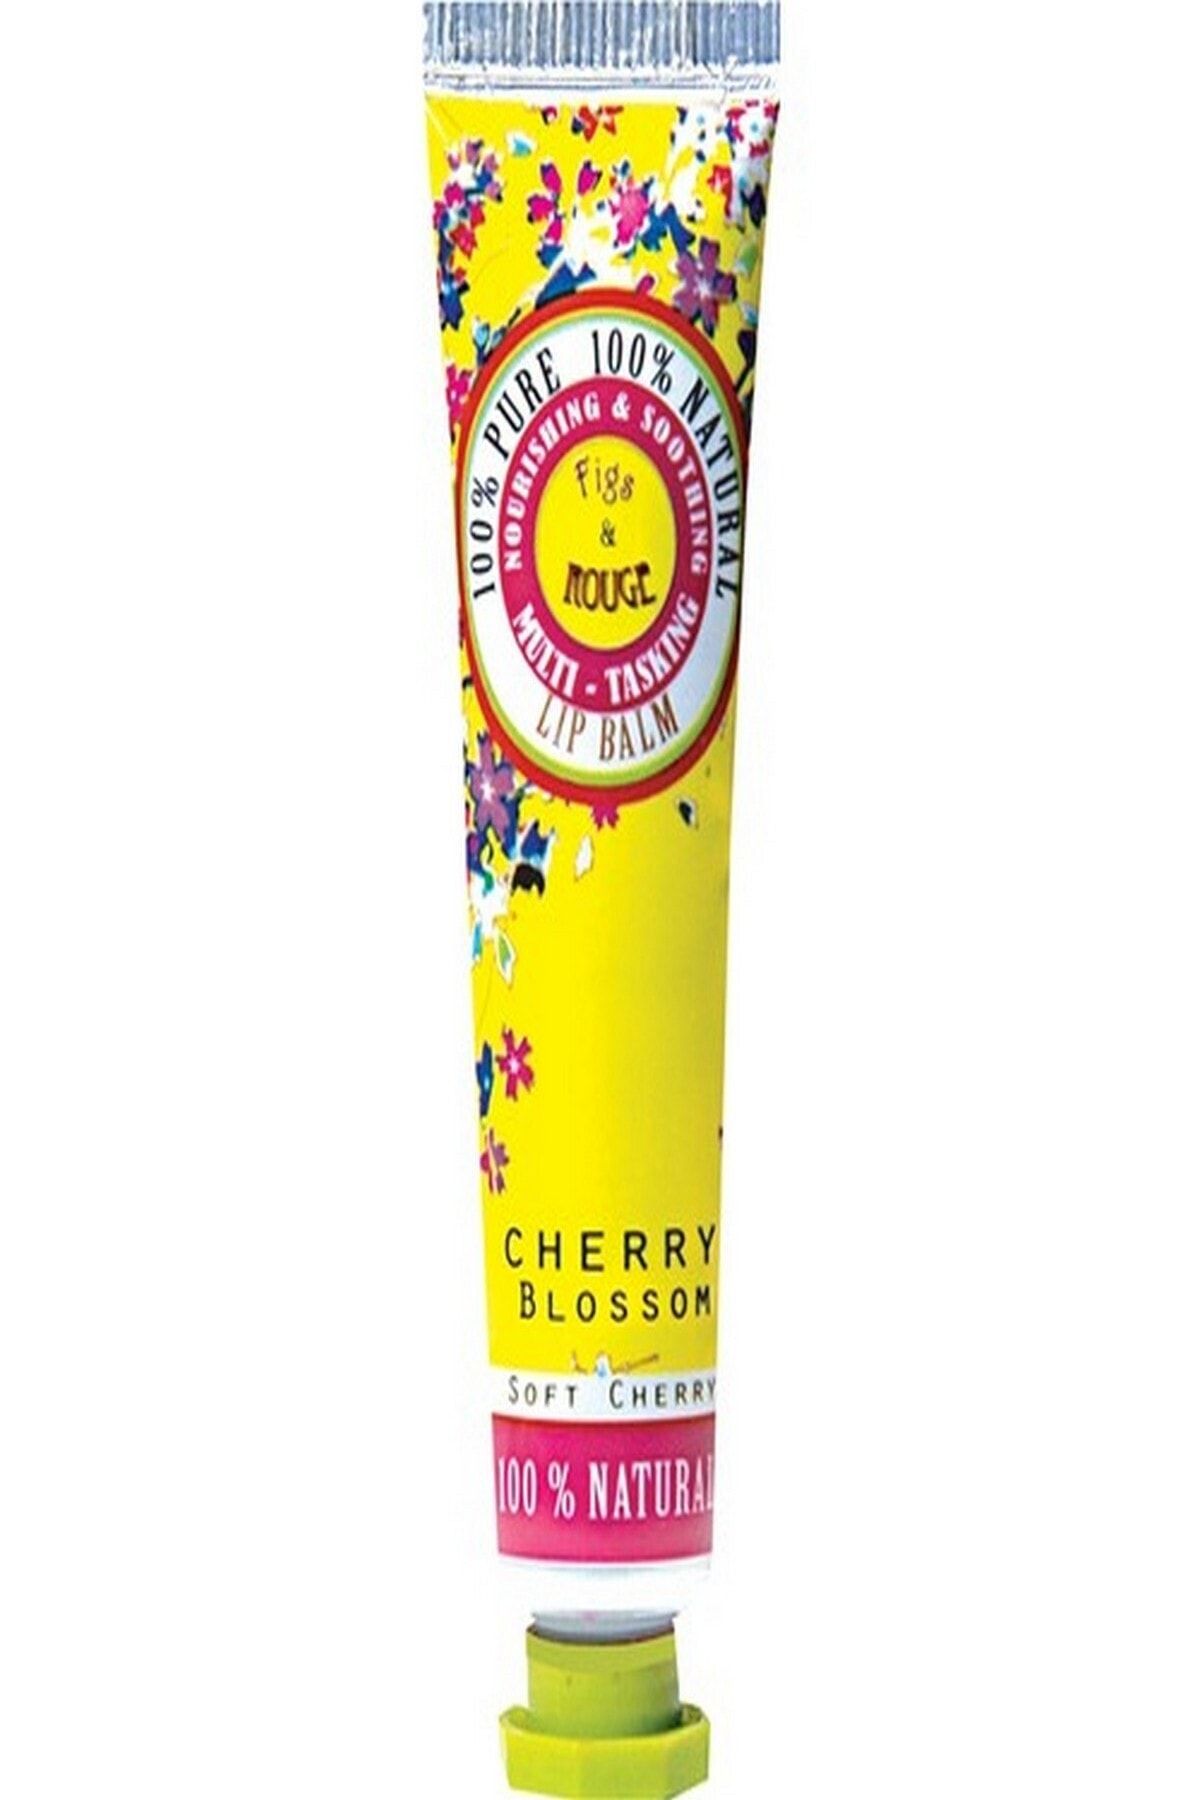 Fing'rs Prints Figs&rouge Cherry Blossom Lip Balm